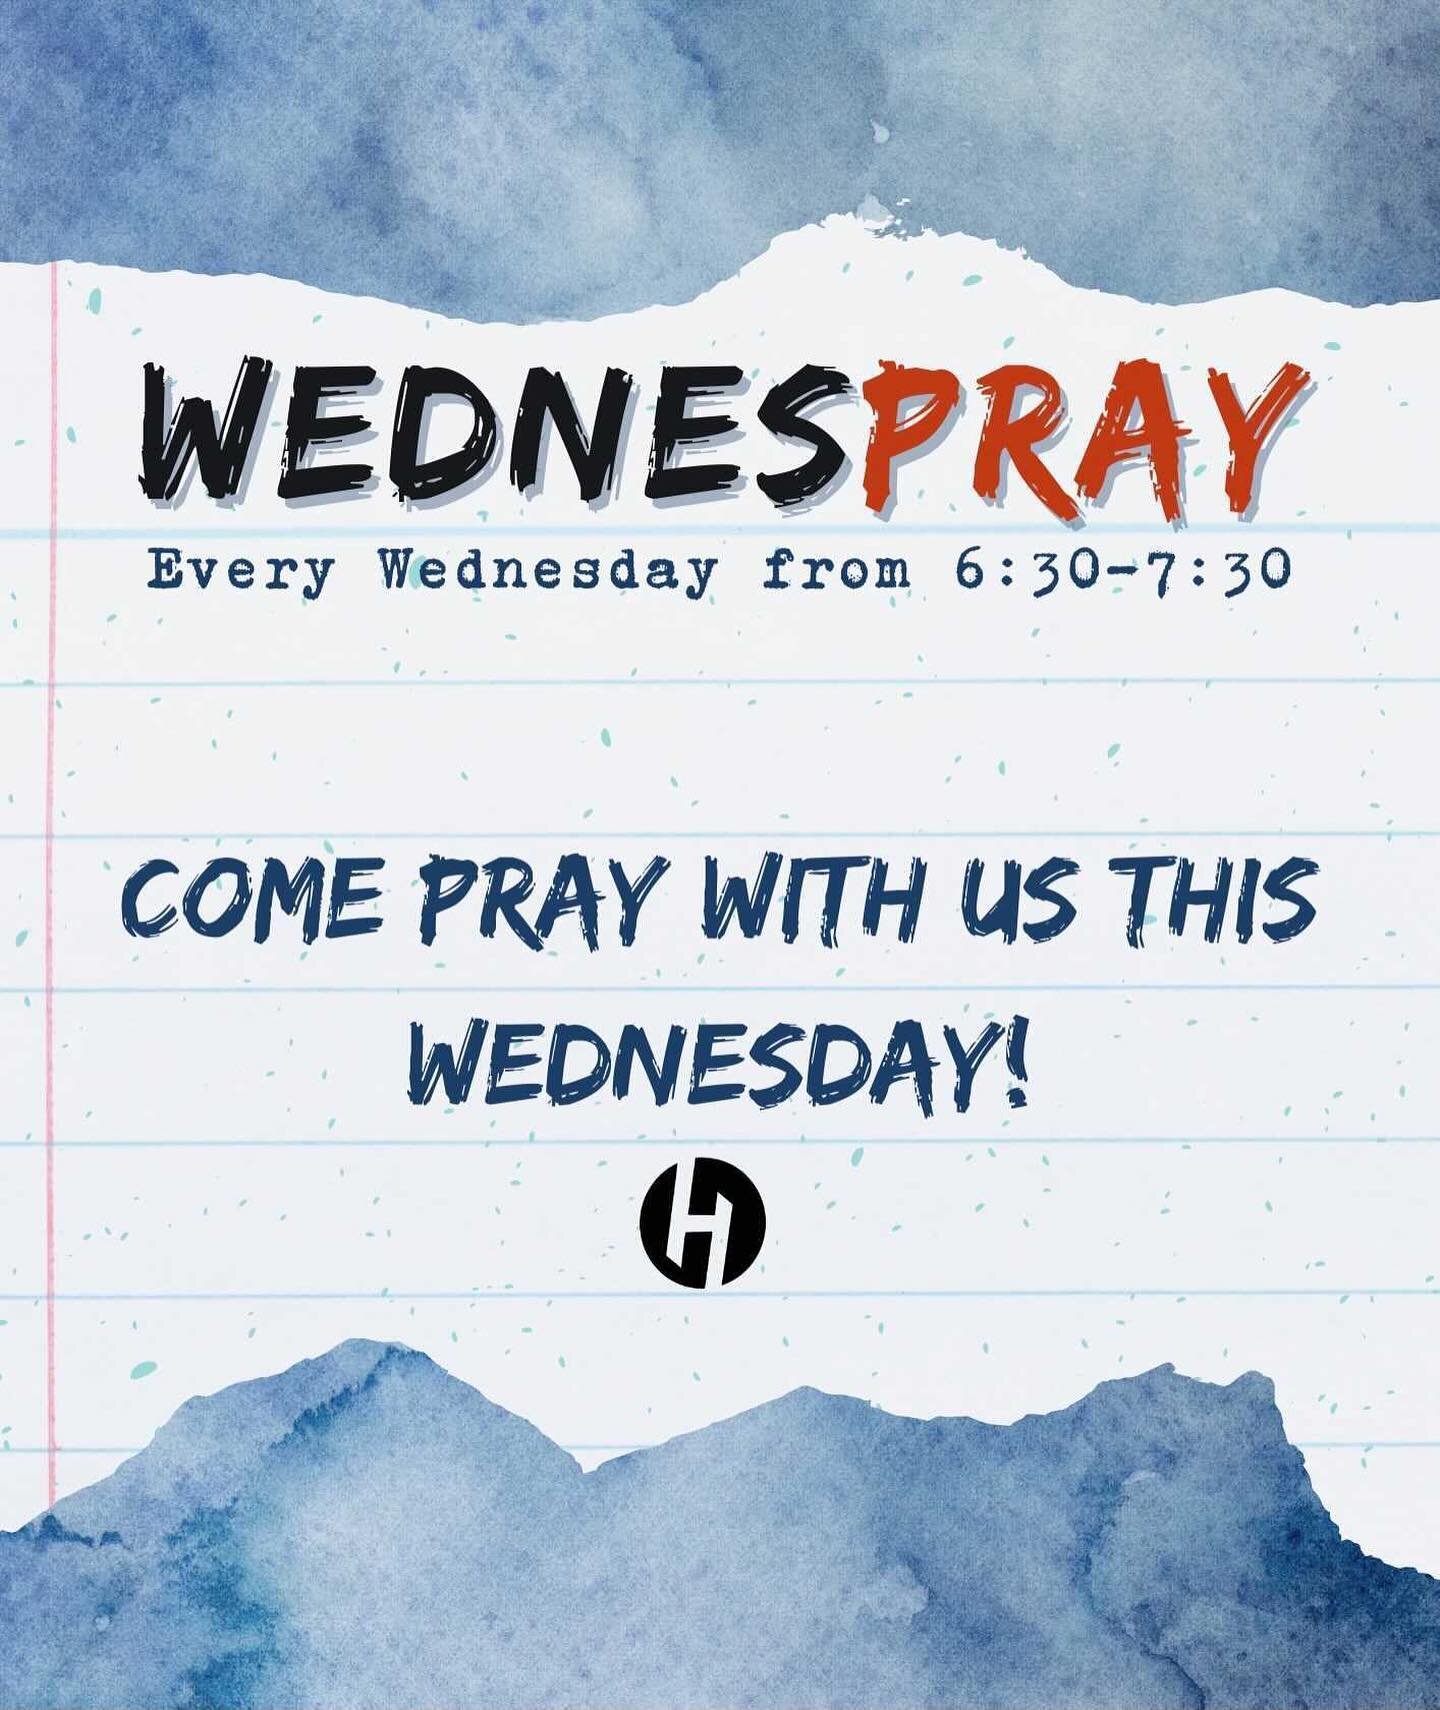 Wednespray is back and better!

Come pray with HAVEN this Wednesday on zoom from 6:30 to 7:30pm!

It will be a  time for you to let your requests known to God. See you on WEDNESDAY!🙏🏾

You can find the zoom link in our bio, as well as a place to su